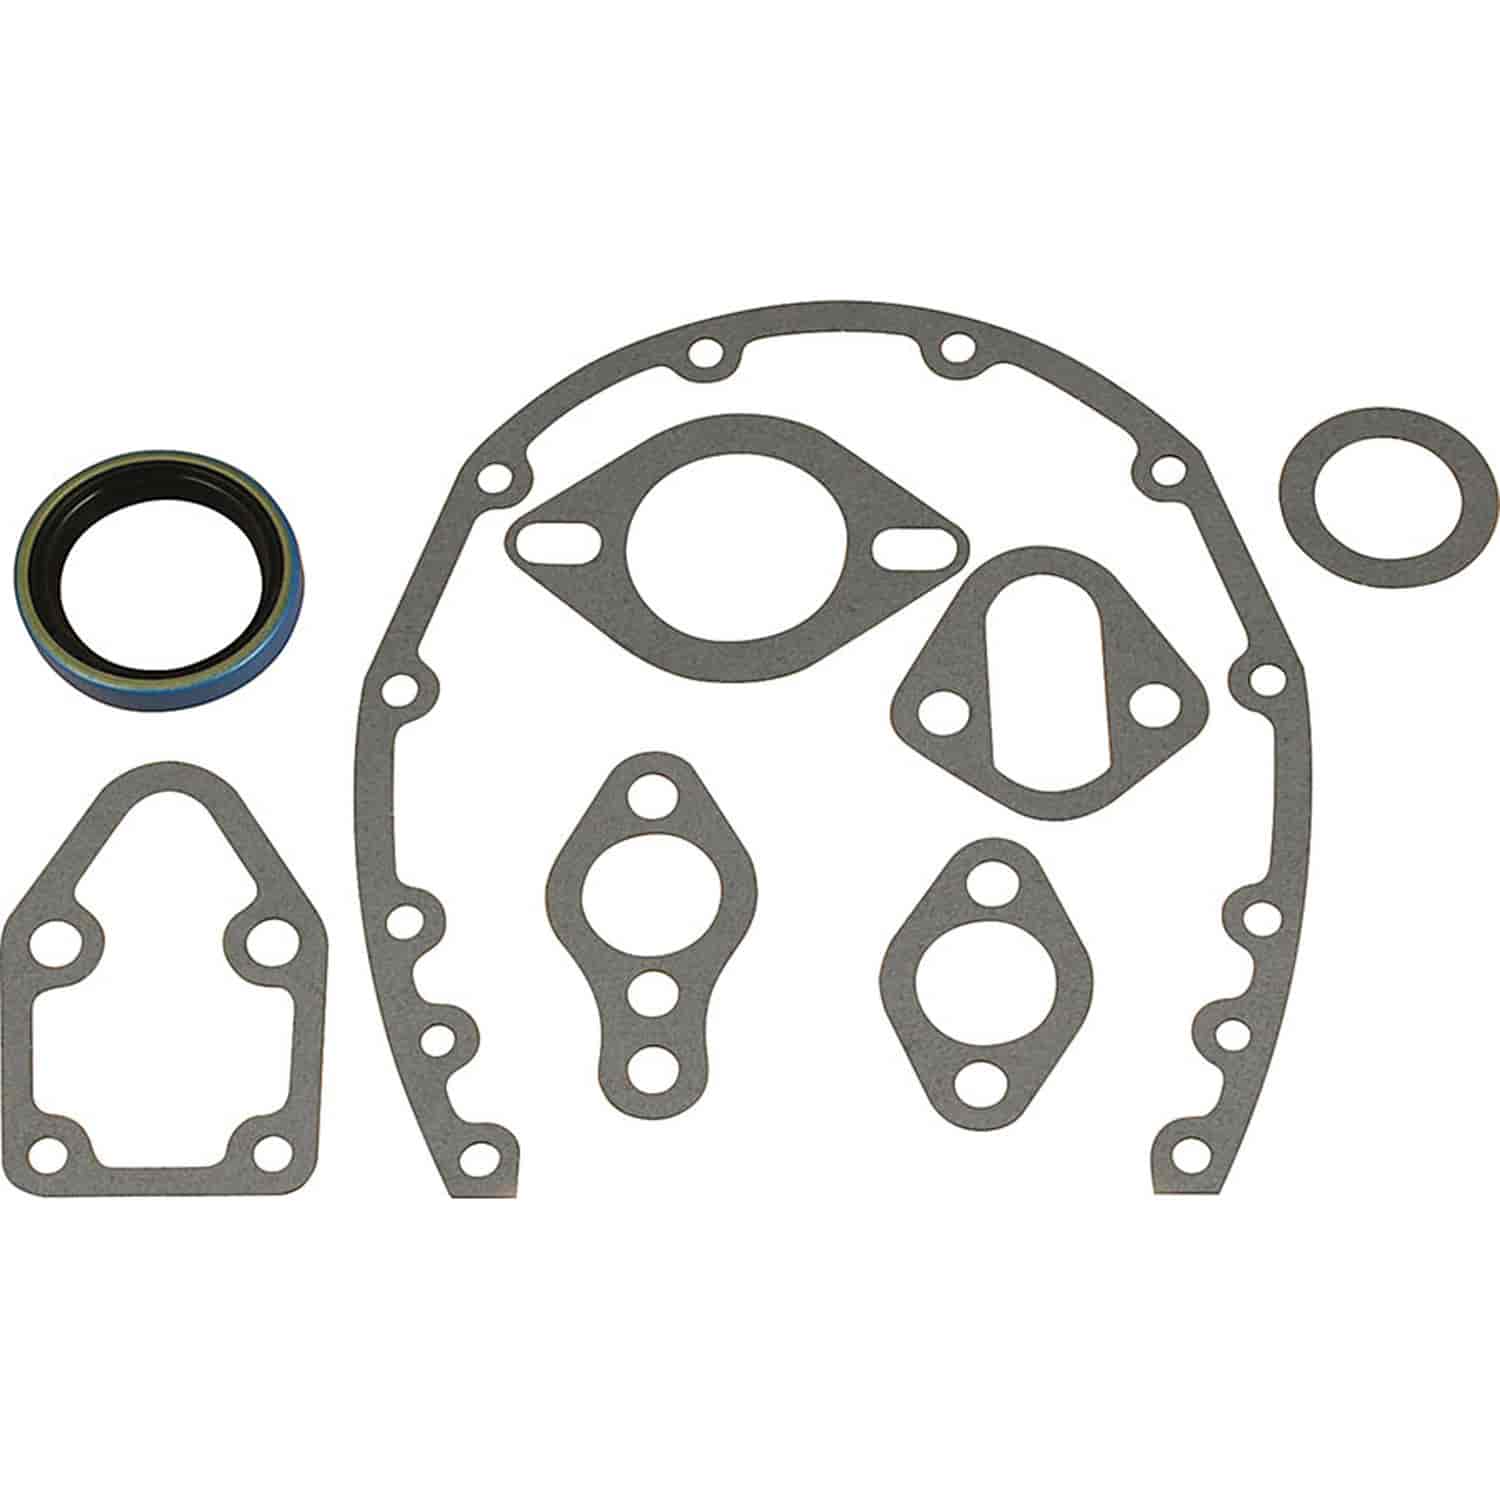 SB Chevy Front Of Engine Gasket Set